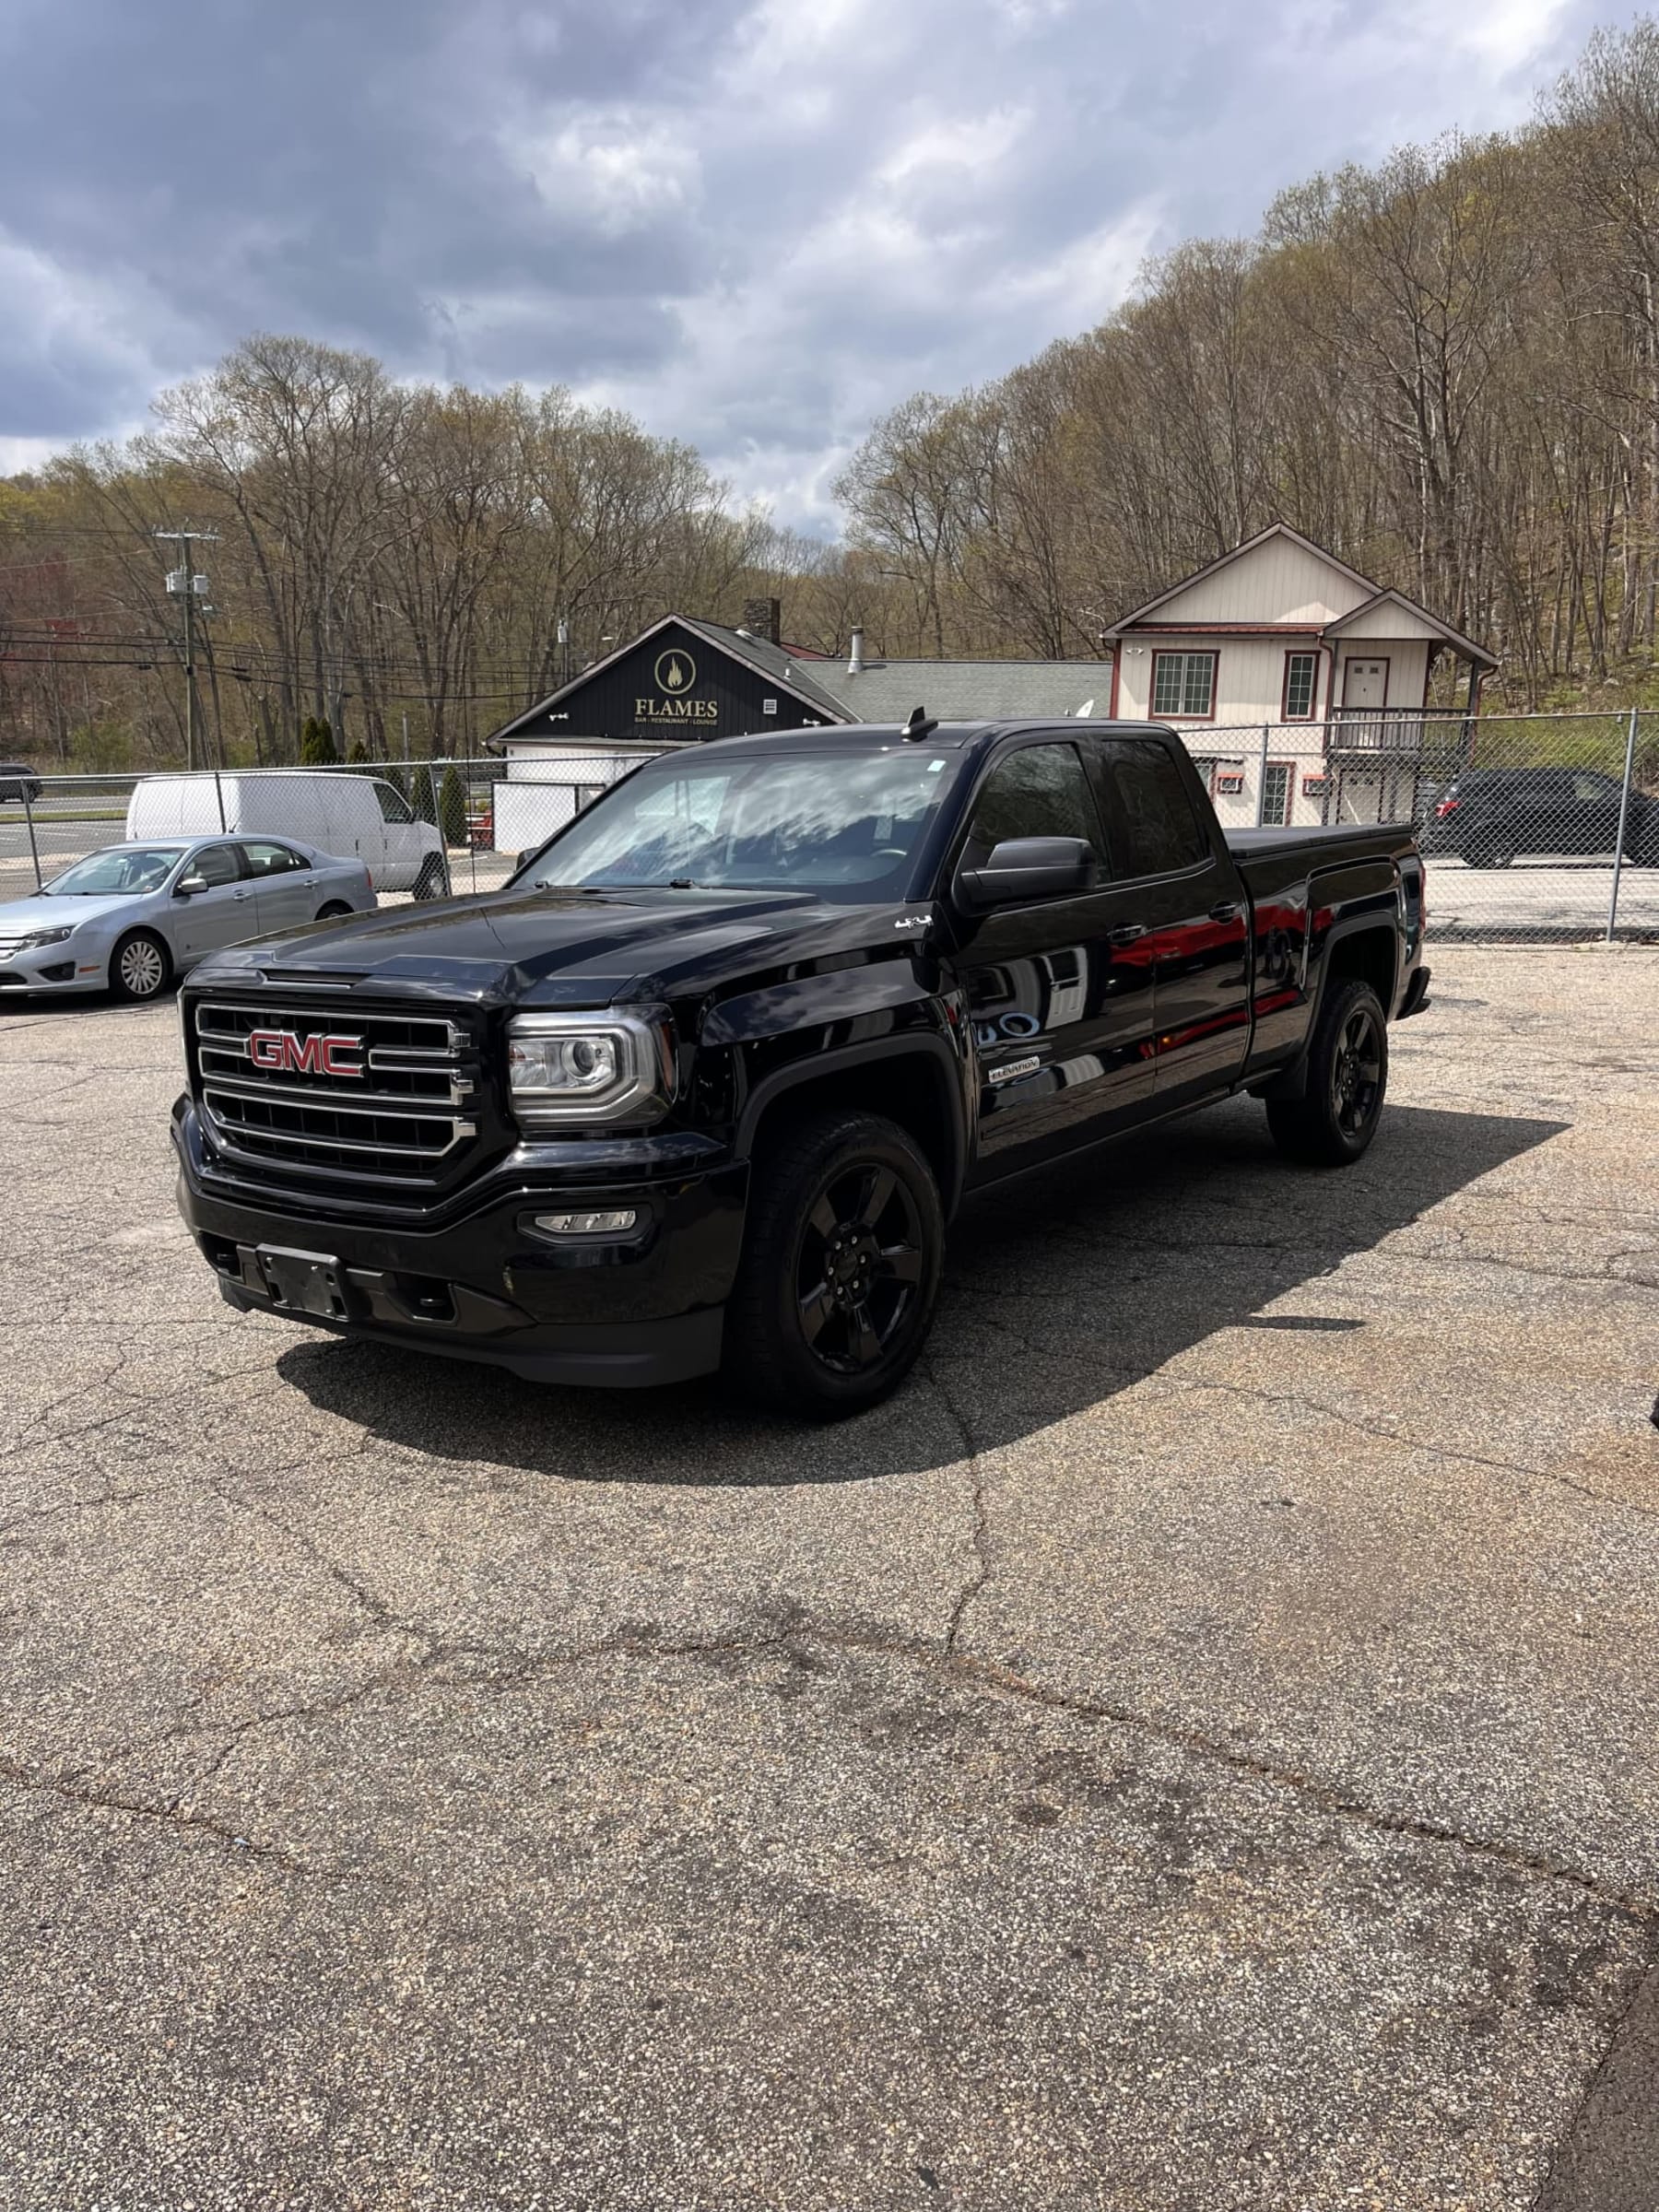 NEW ARRIVAL!! 2017 GMC Sierra 1500 DBL cab Elevation package!! Clean carfax! 4x4!! Only 86,700 miles! Runs and drives great!! Priced well below retail value!! Won’t last at only $20,900